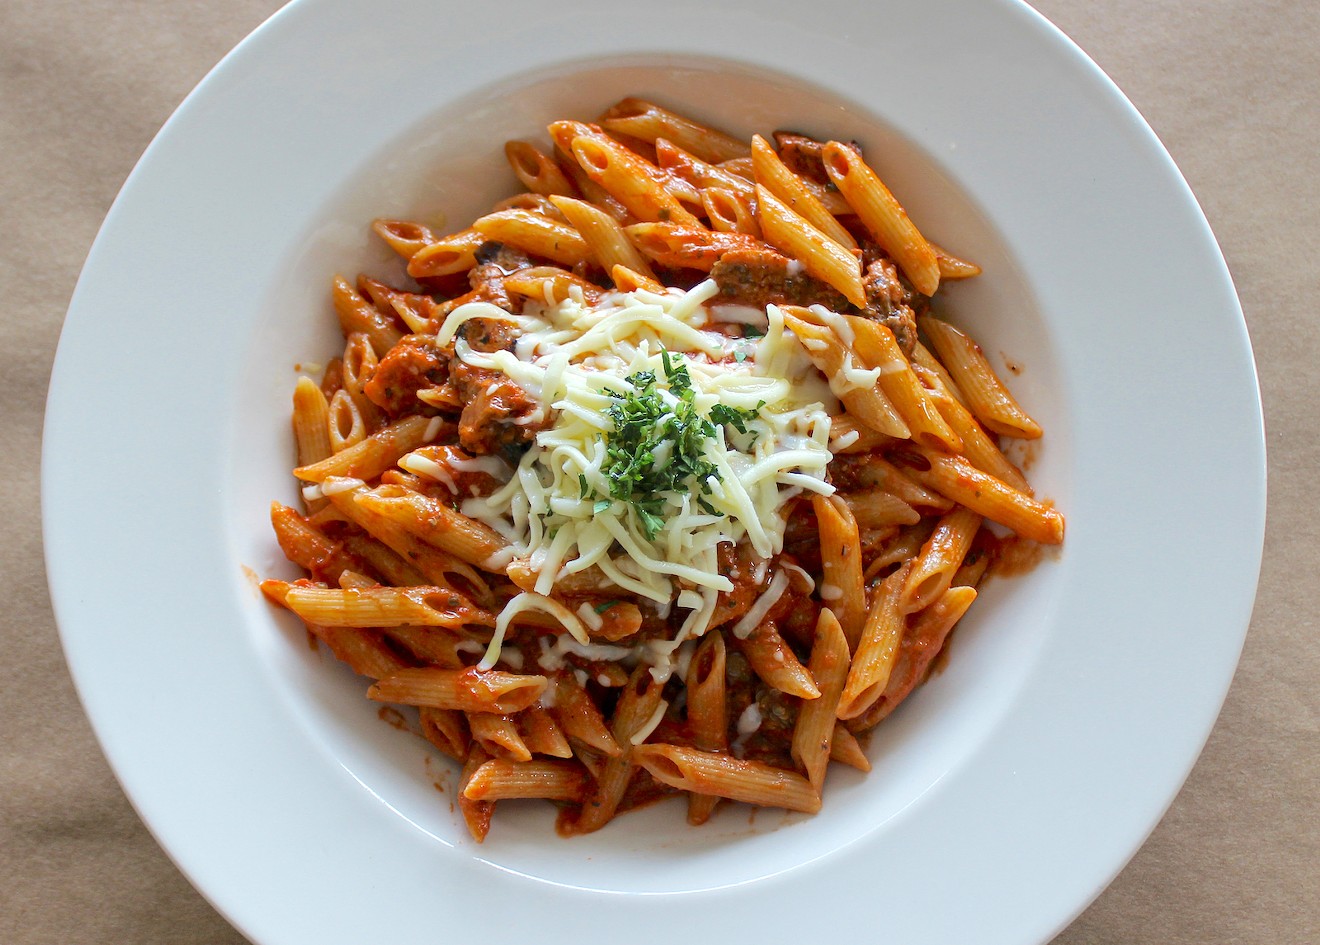 The Penne a la Melanzane is a specialty at Nonna Lina, now open in Miami.